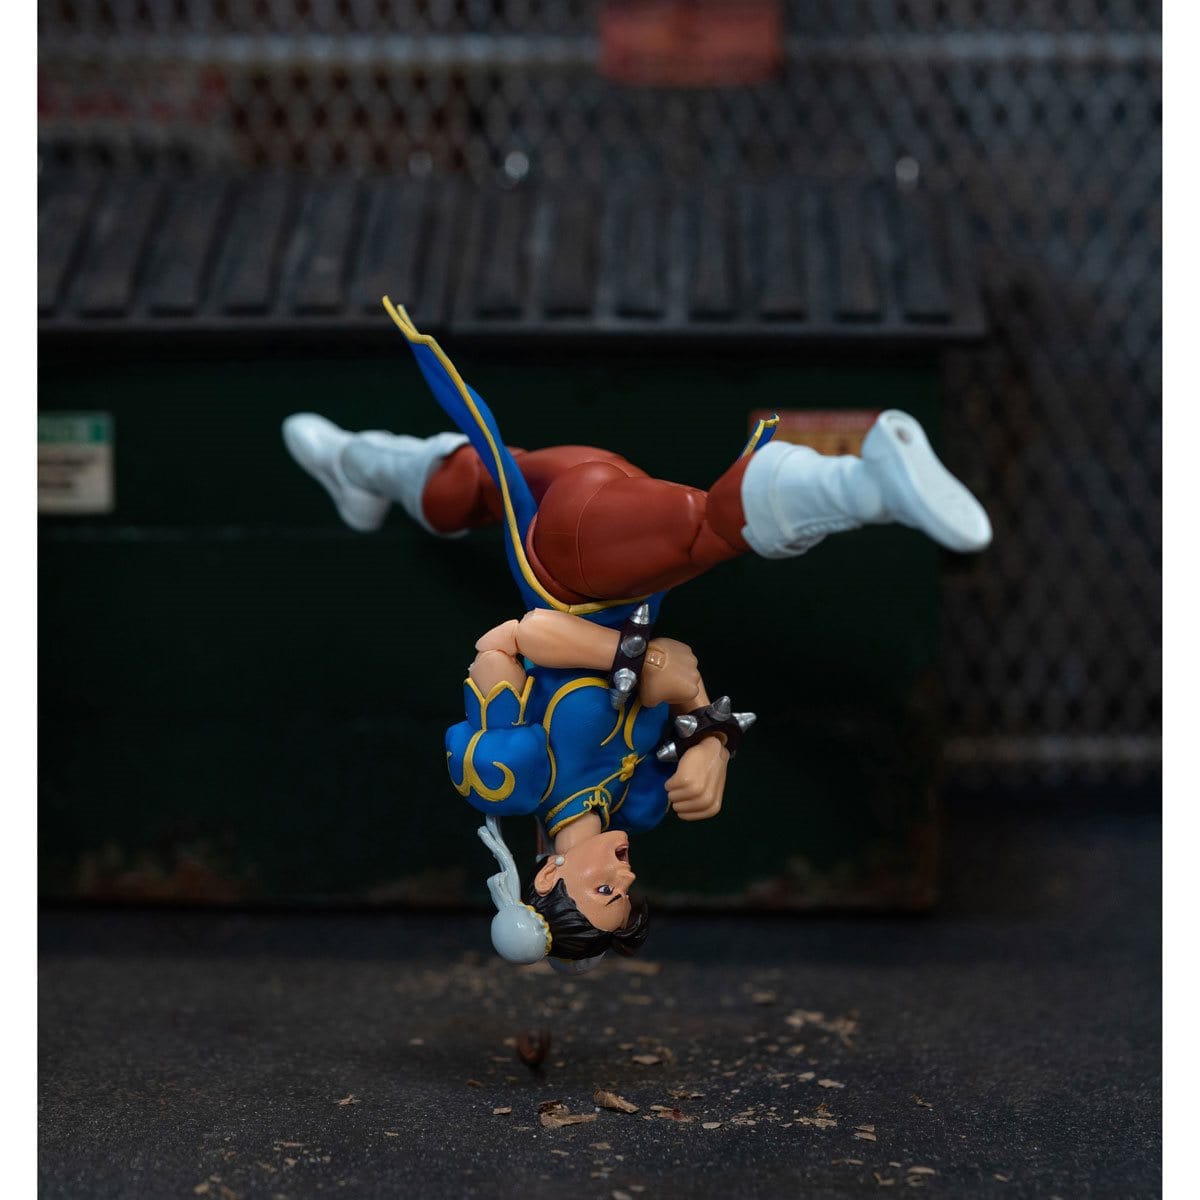 Ultra-Street-Fighter-II-Chun-Li6-Inch-Scale-Action-Figure-toys-pose-collectible-spinning-bird-kick